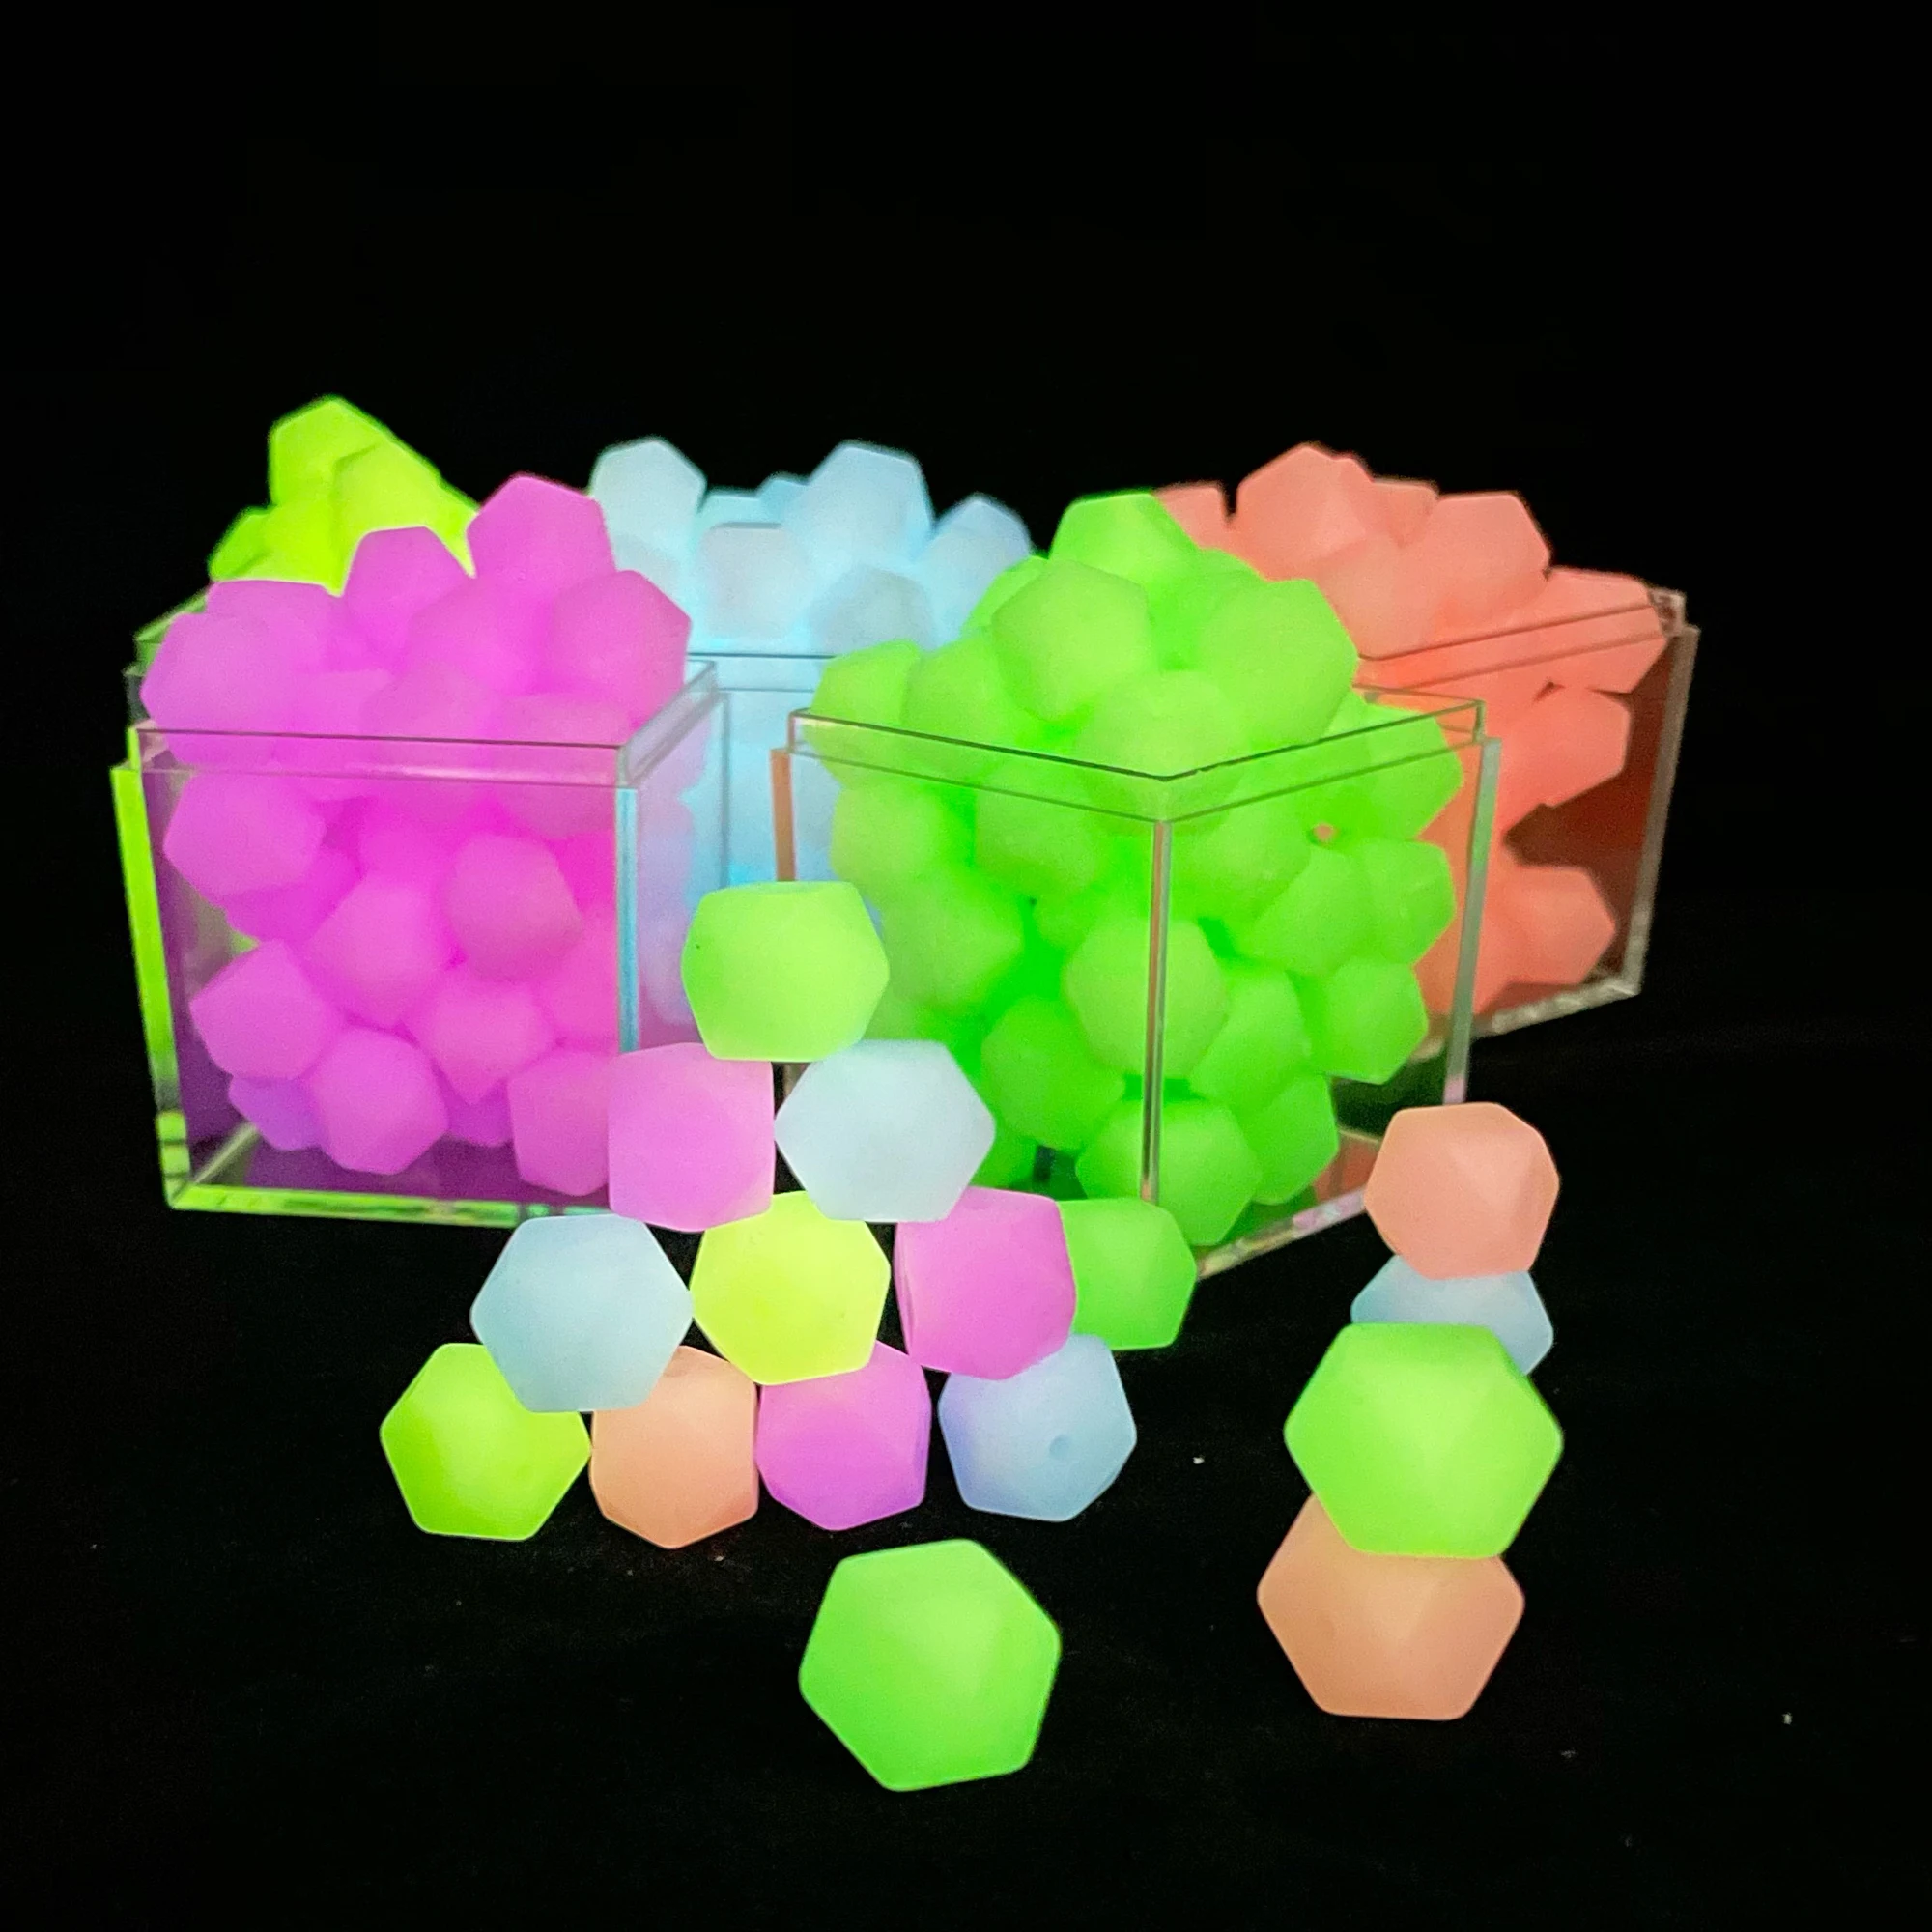 

20pcs 13mm Mini Hexagon Luminous Beads Glow In The Dark BPA Free Silicone Loose Marking DIY Chewable Colorful For Kids